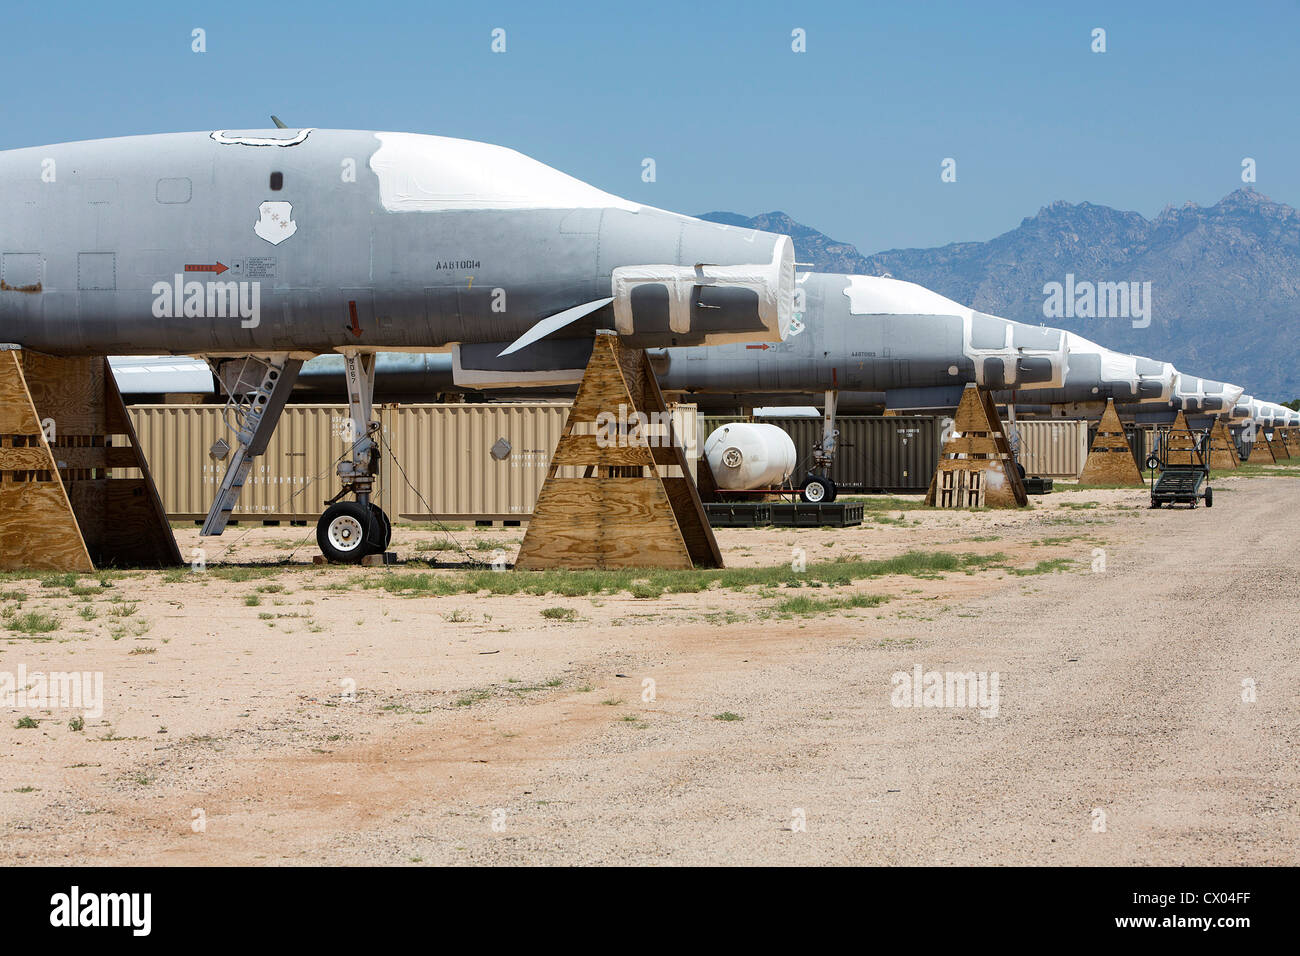 B-1 Lancer aircraft in storage at the 309th Aerospace Maintenance and Regeneration Group at Davis-Monthan Air Force Base. Stock Photo